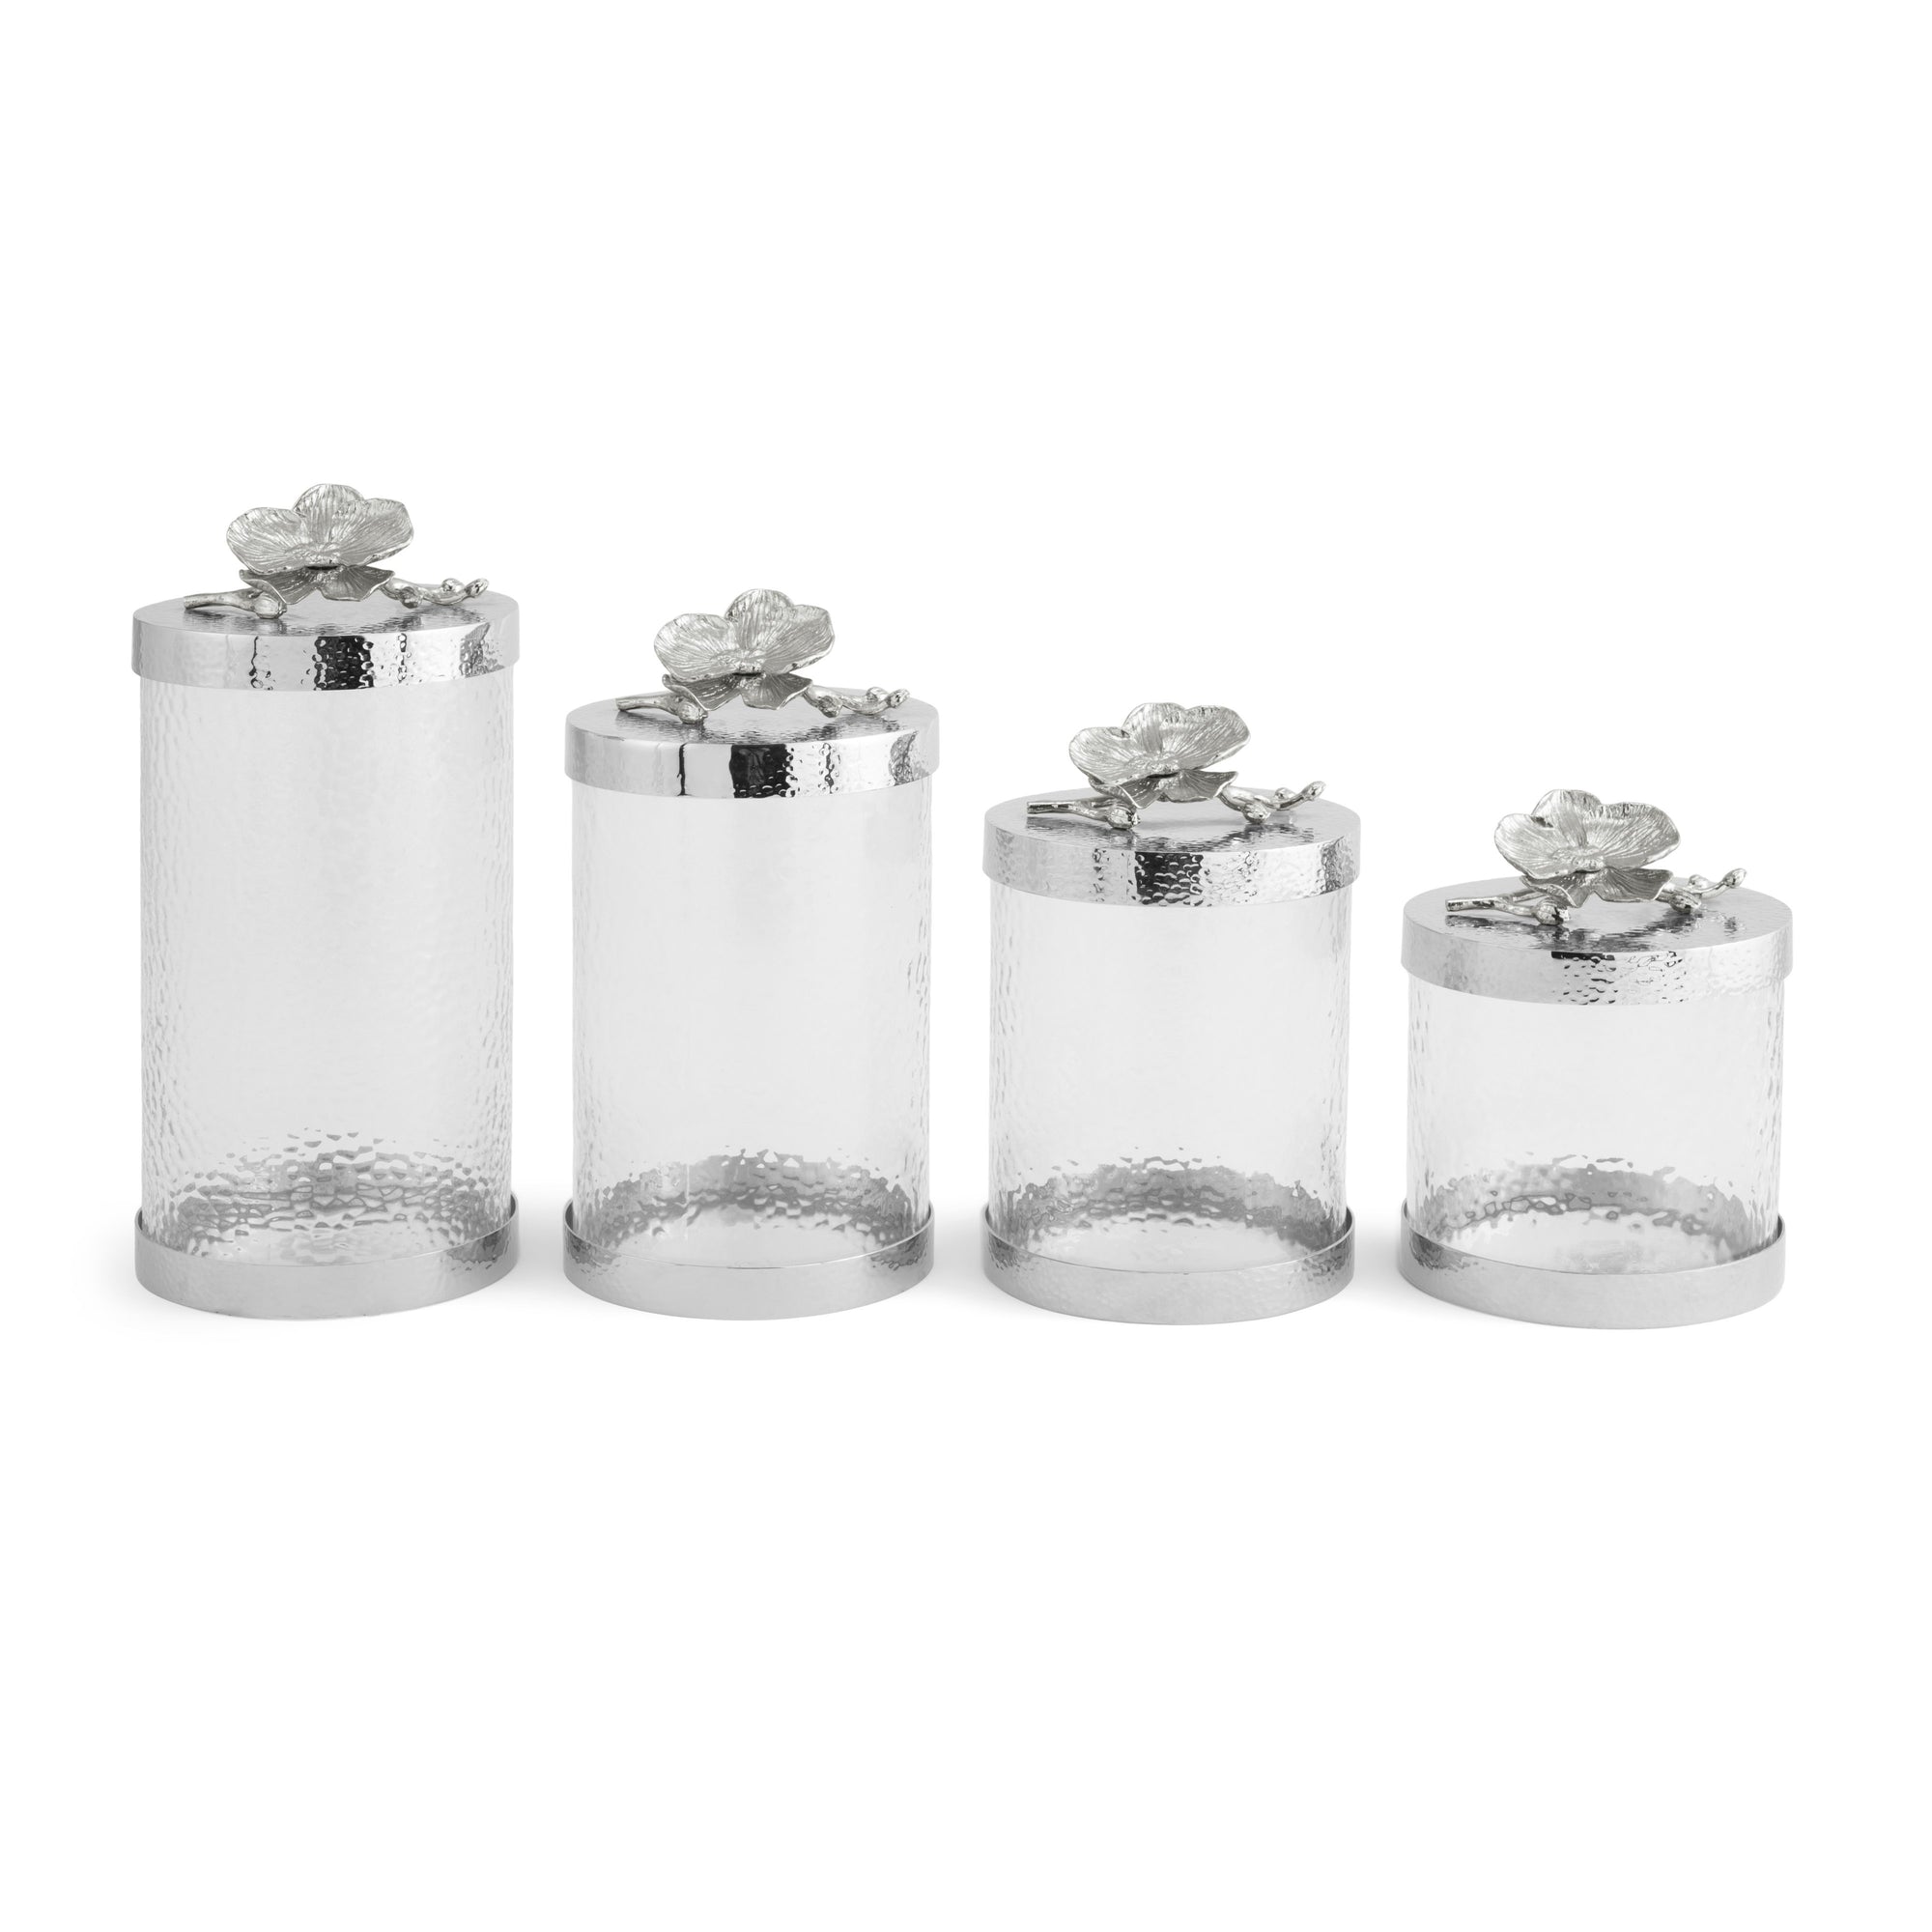 Michael Aram White Orchid Canisters